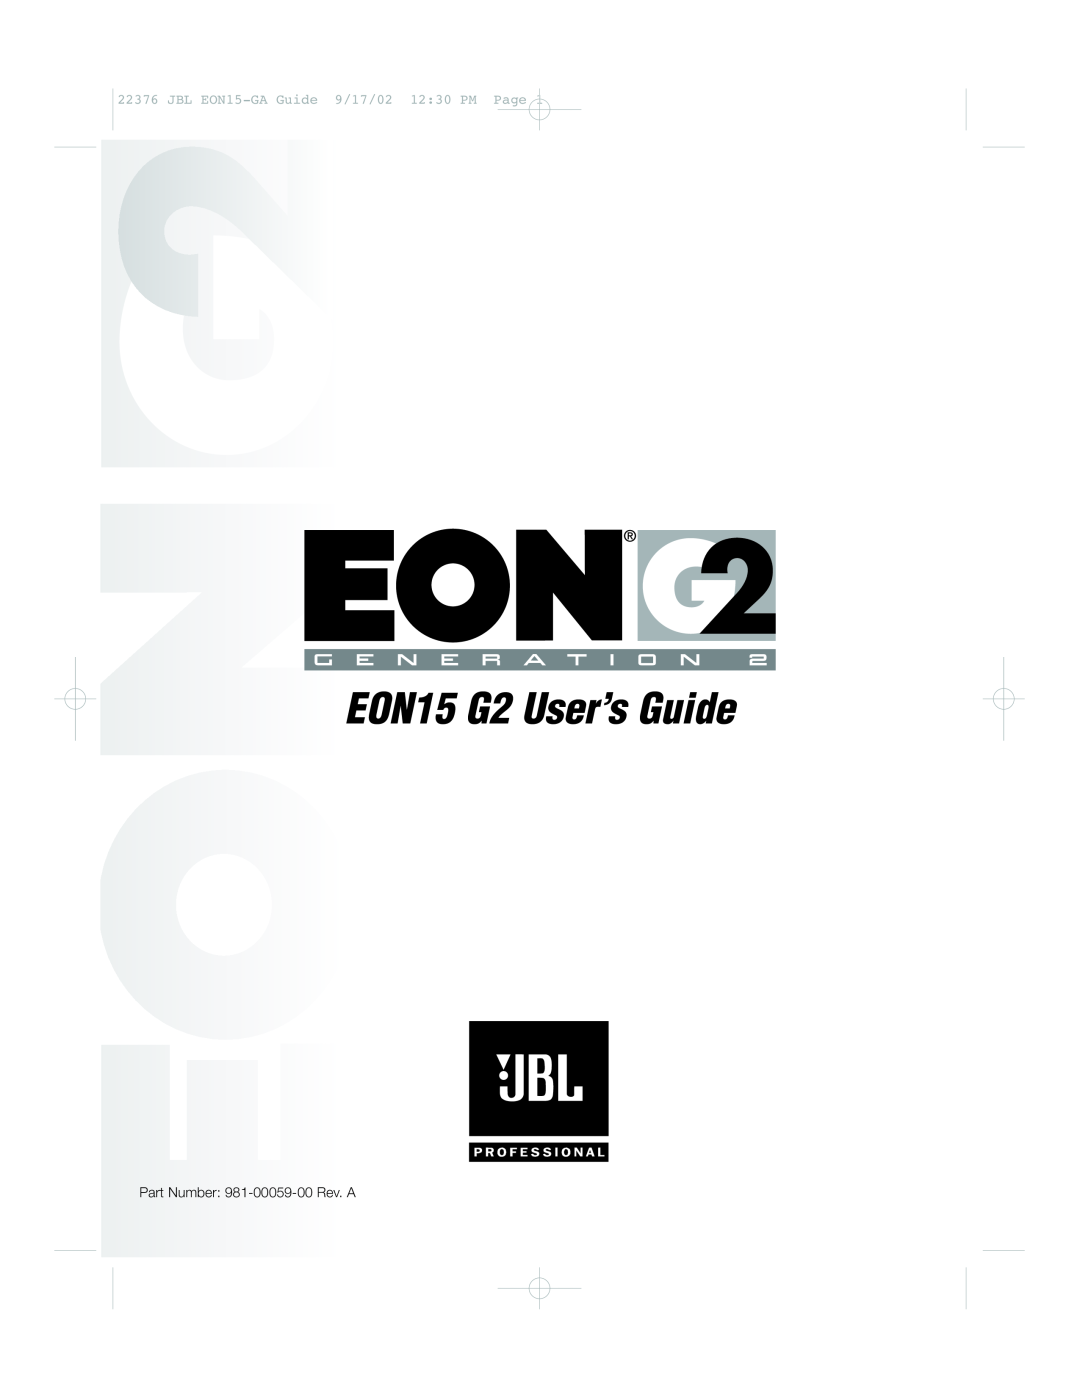 JBL manual EON15 G2 User’s Guide, JBL EON15-GAGuide 9/17/02 12 30 PM Page 